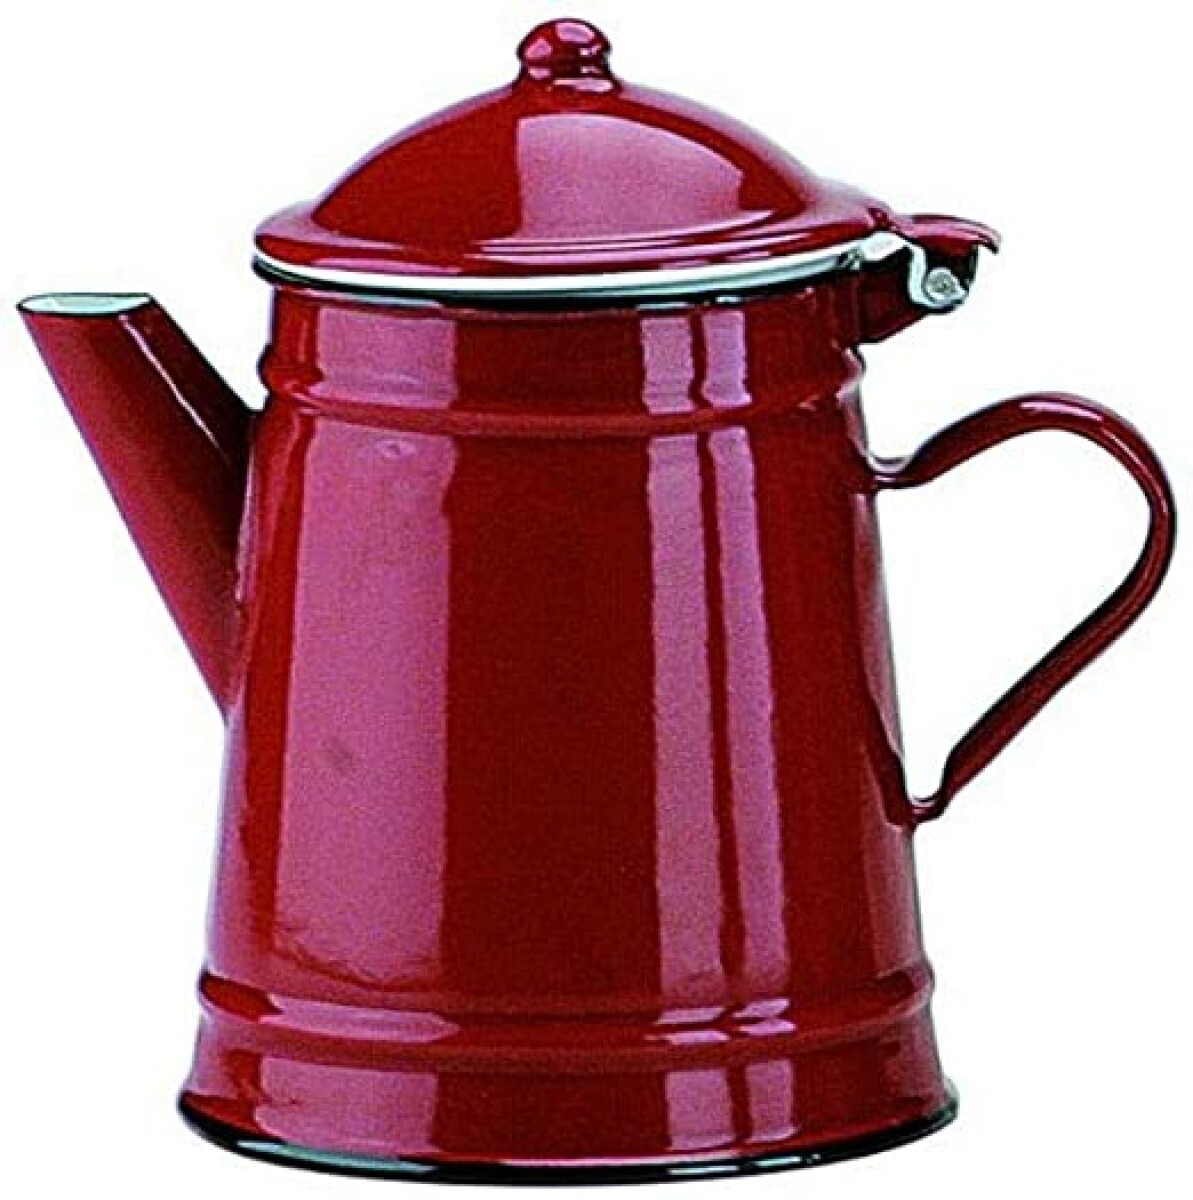 Cafetera Conica roja 0.5lts 